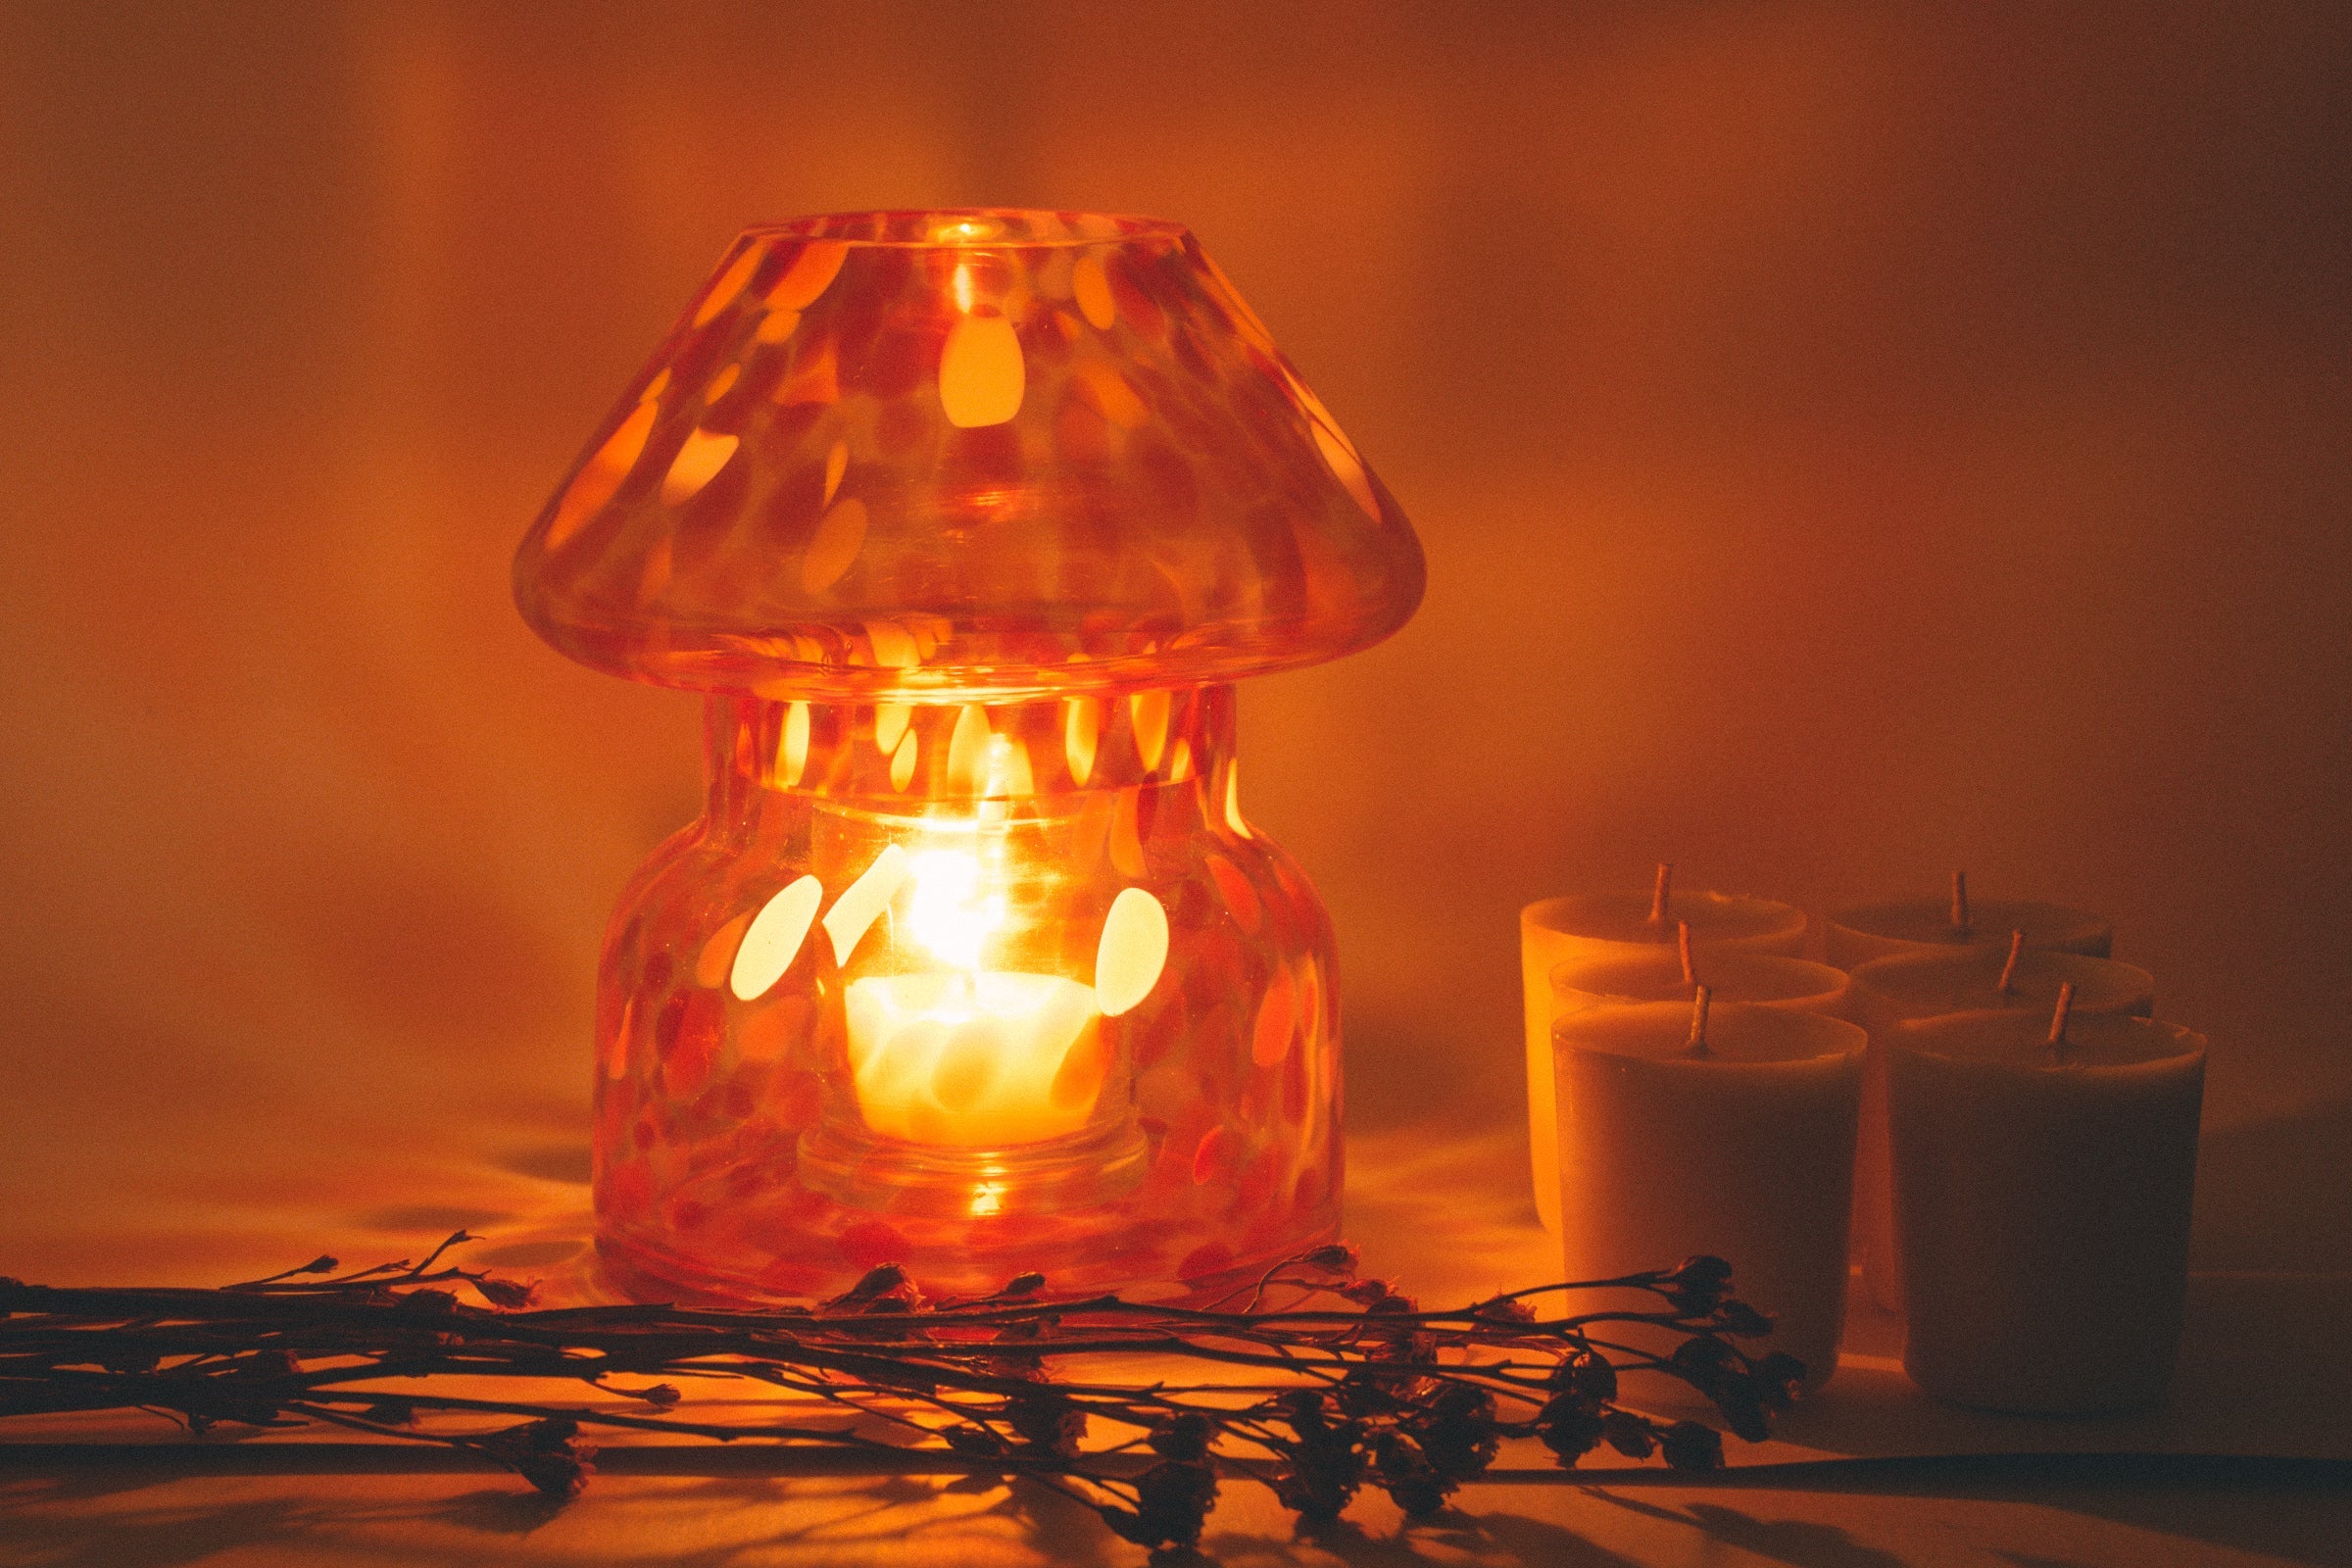 mushroom candle lamp refills next to lit retro candle lamp.